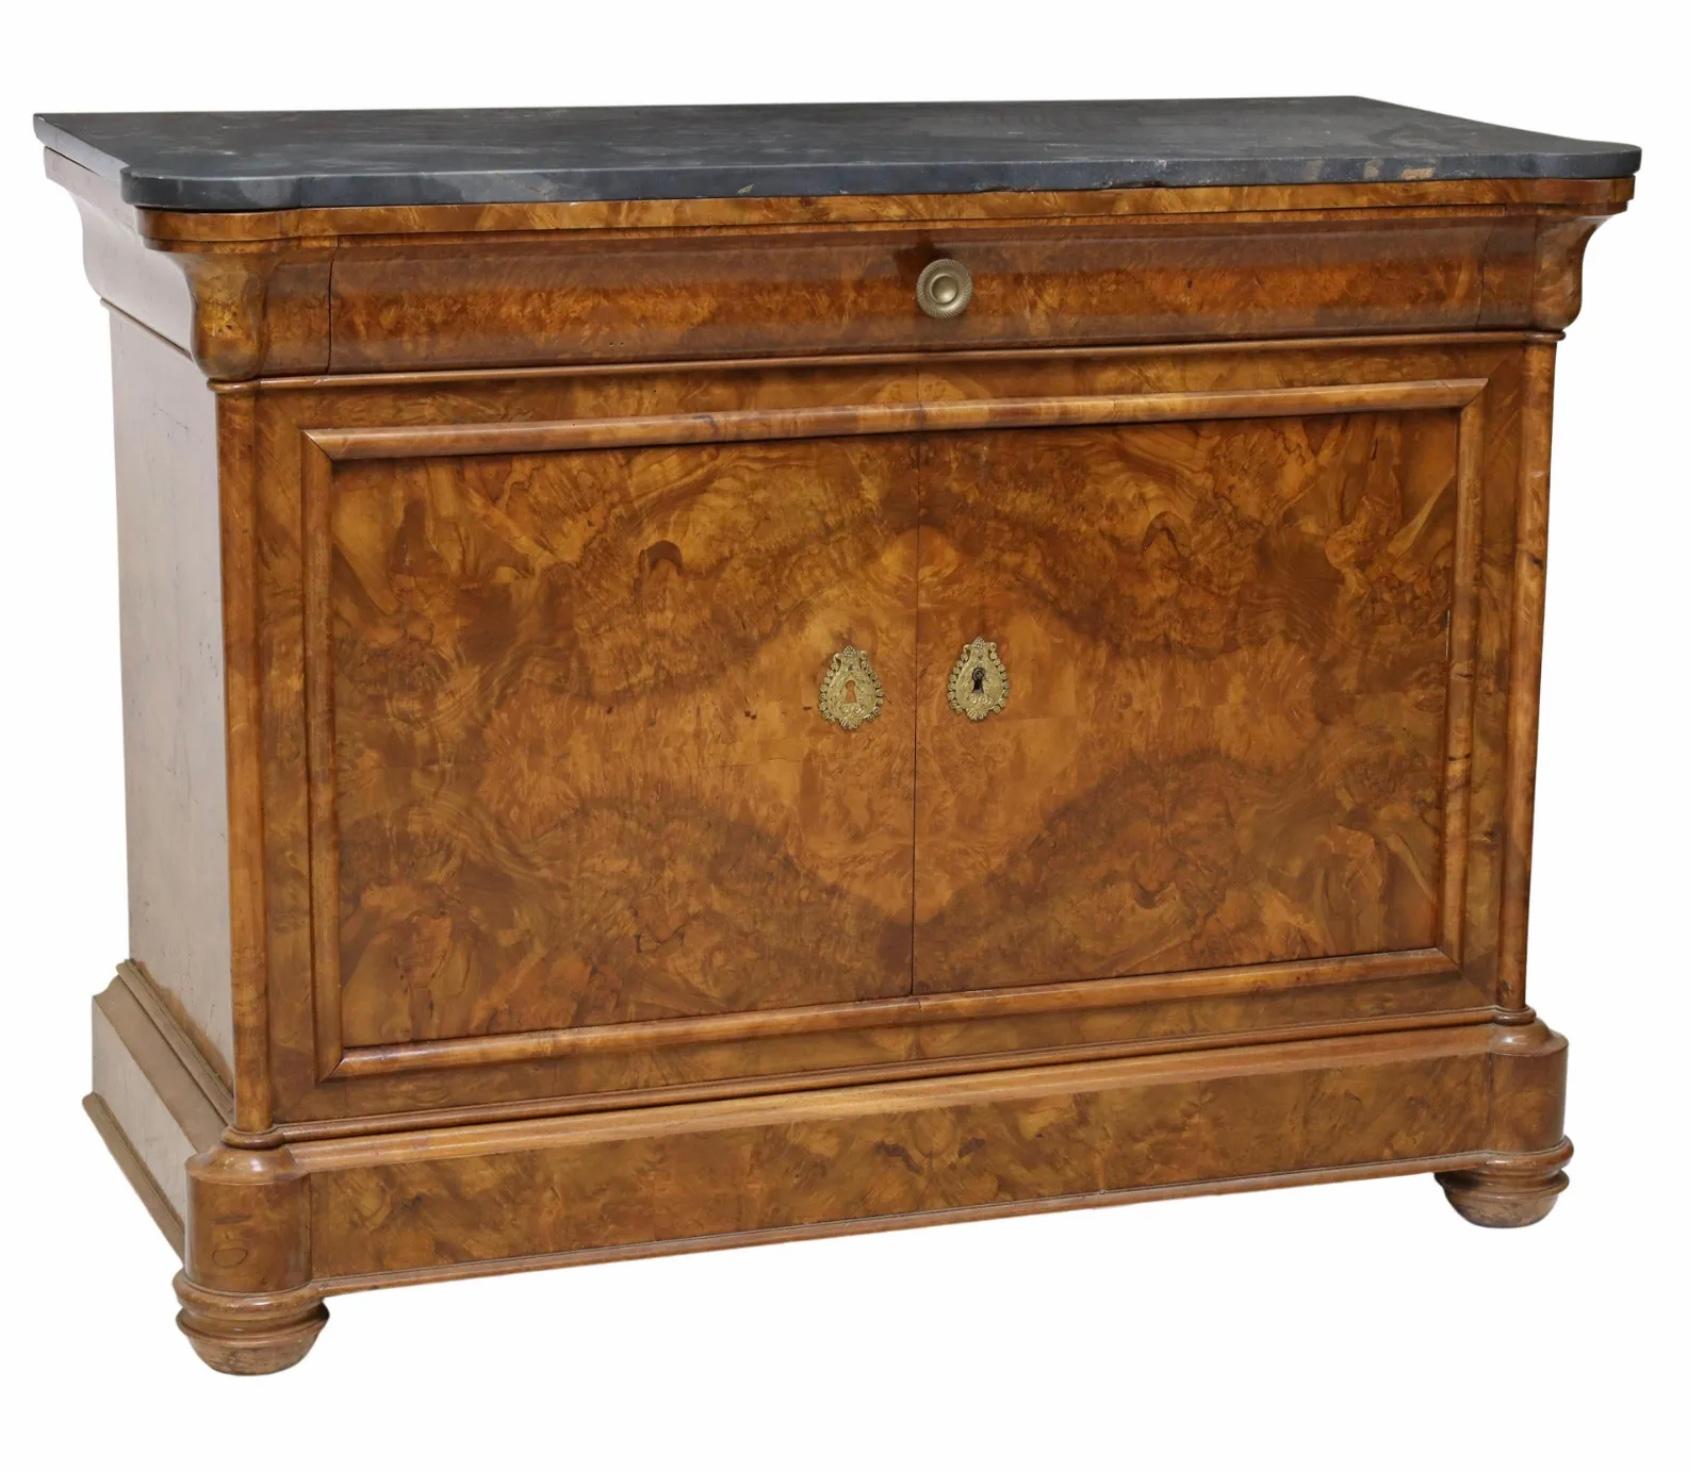 French Louis Philippe period marble-top commode, 
Mid 19th circa 1850., Ogee frieze drawer, double-door cabinet opening to three tray drawers, 
Dimensions: 39